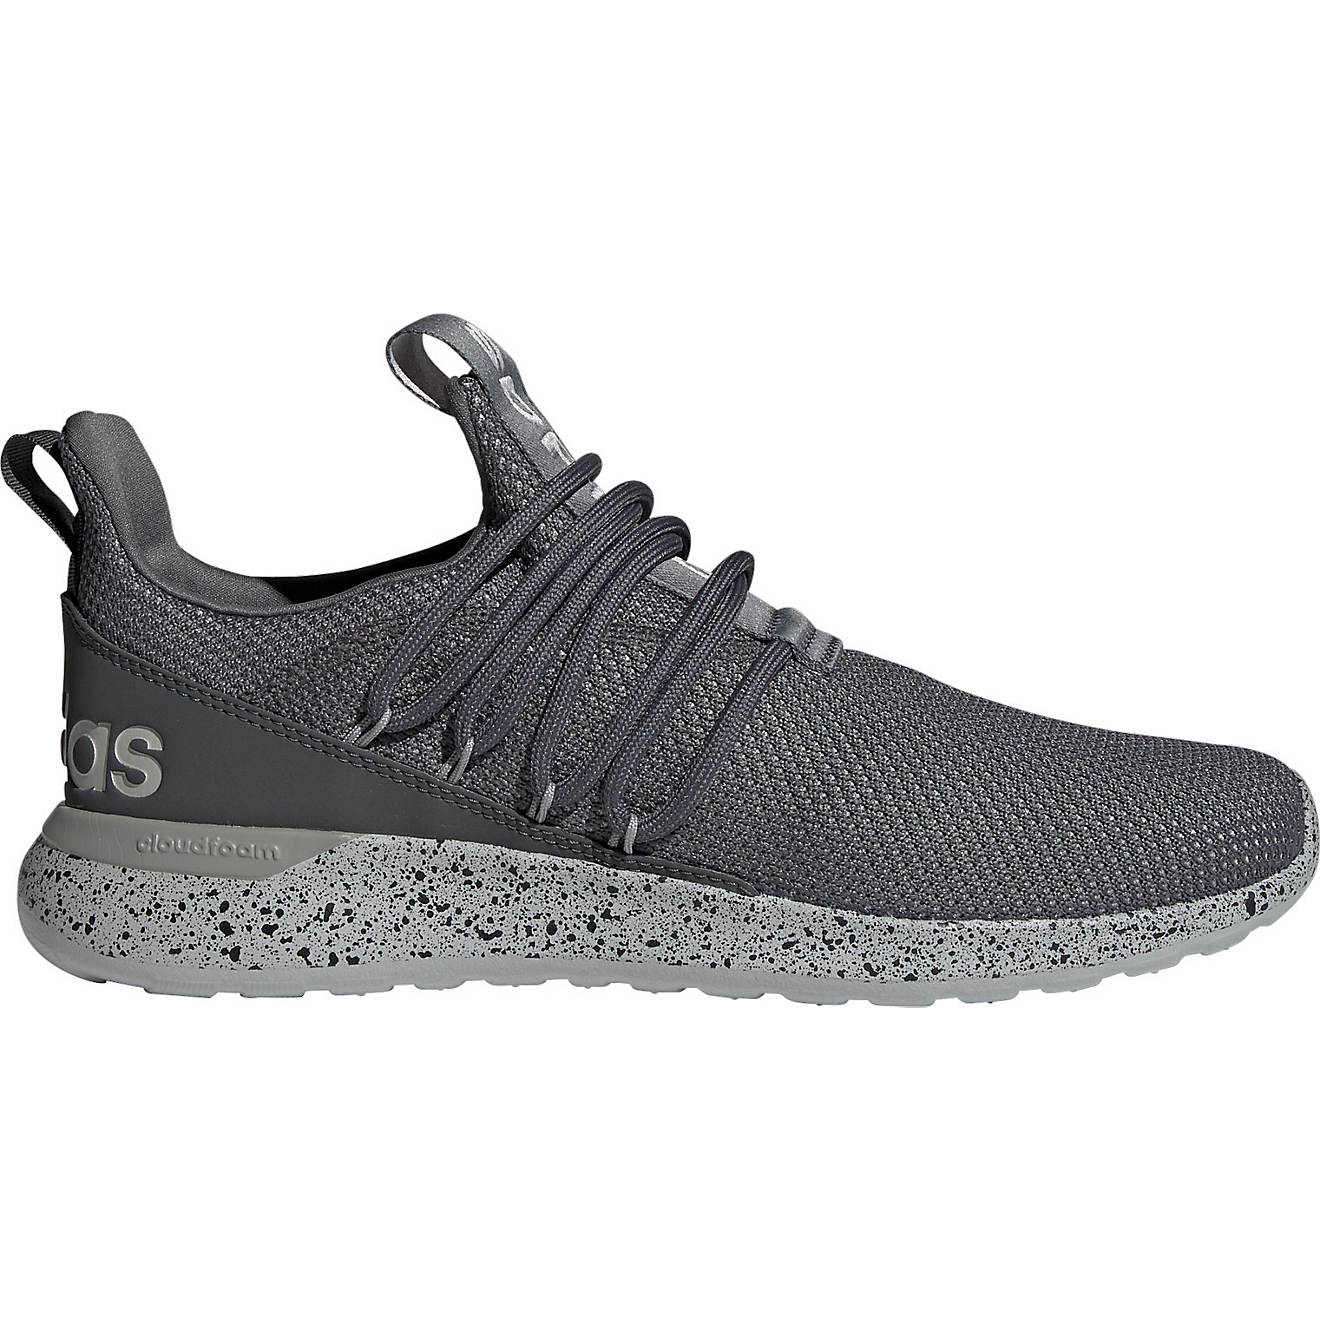 adidas Men's Lite Racer Adapt 3 Slip-On Lifestyle Shoes on Sale At Academy Sports + Outdoors